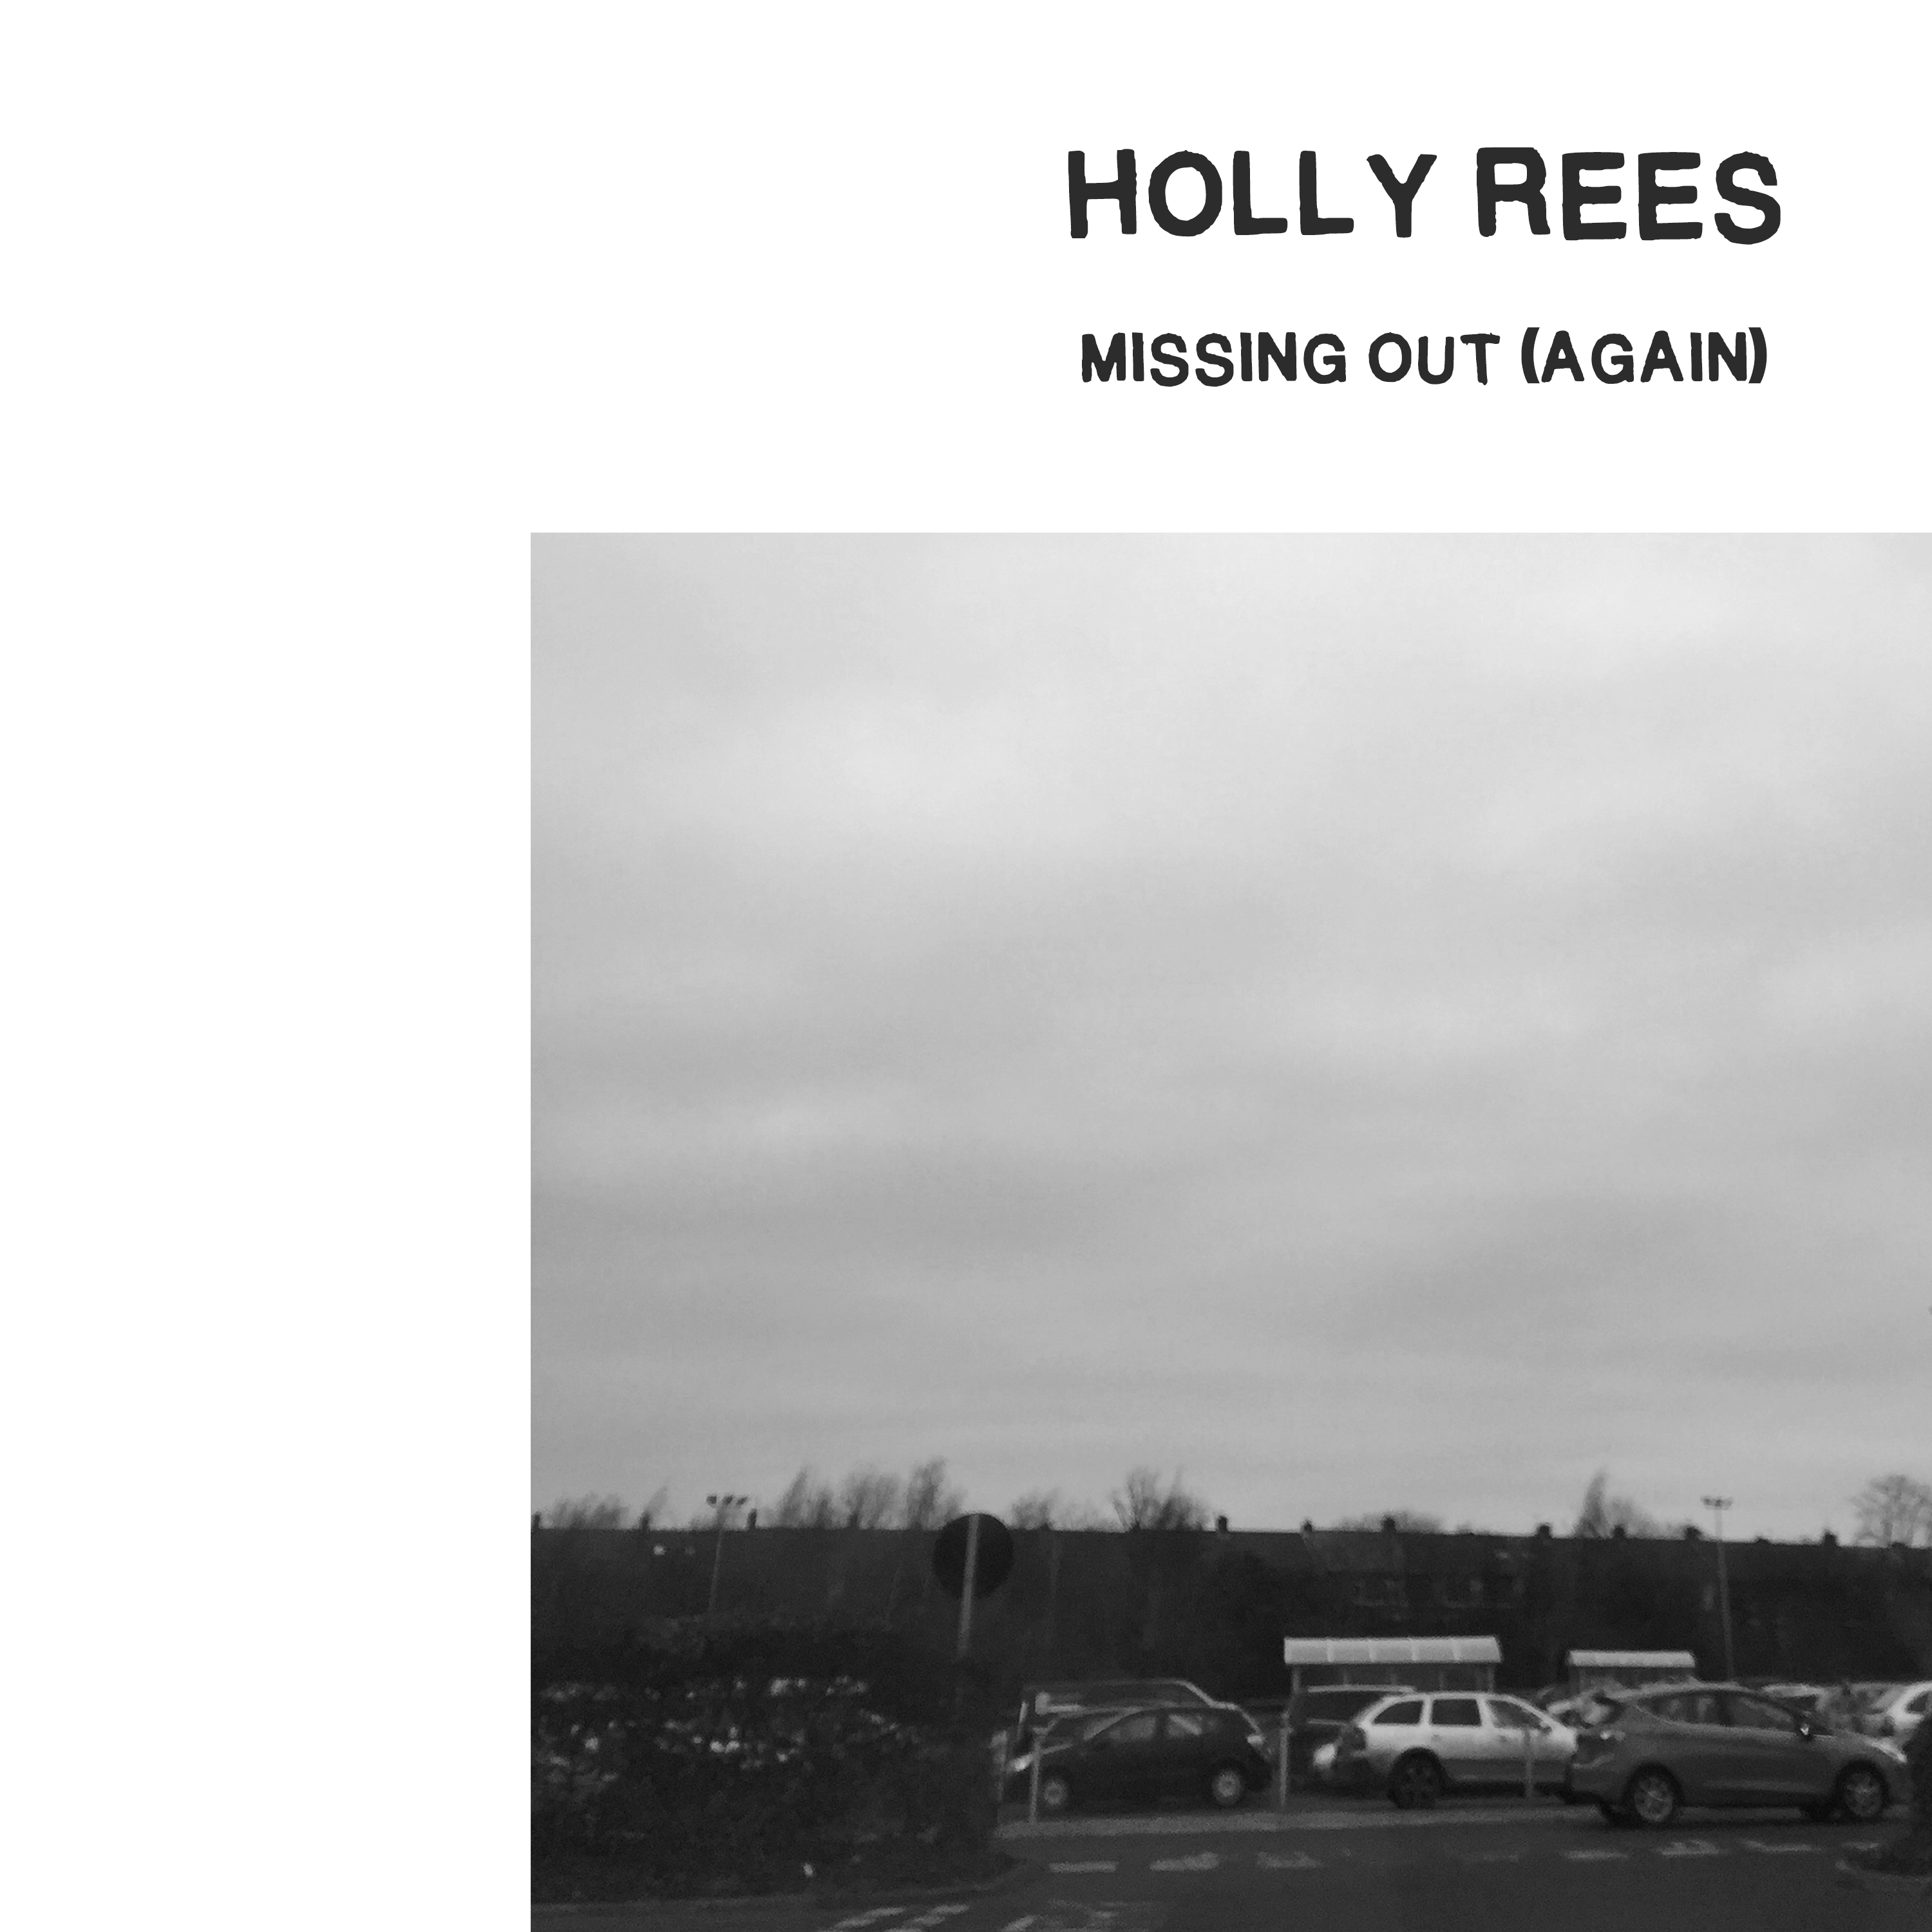 Art for Missing Out (Again) by Holly Rees